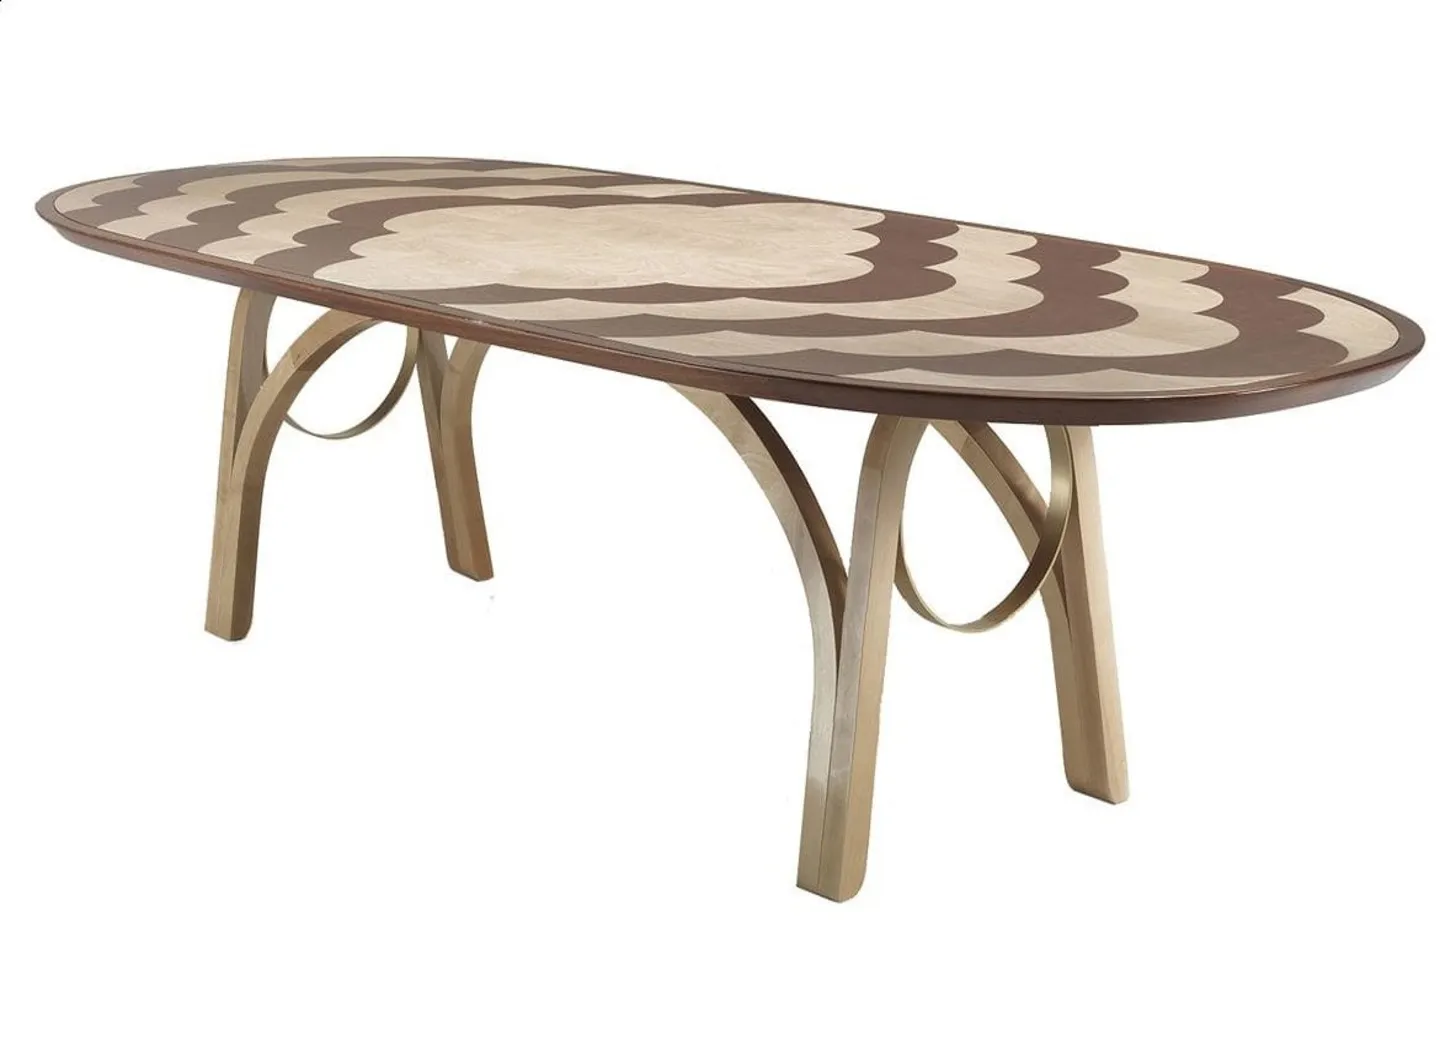 Archway table by Fratelli Boffi